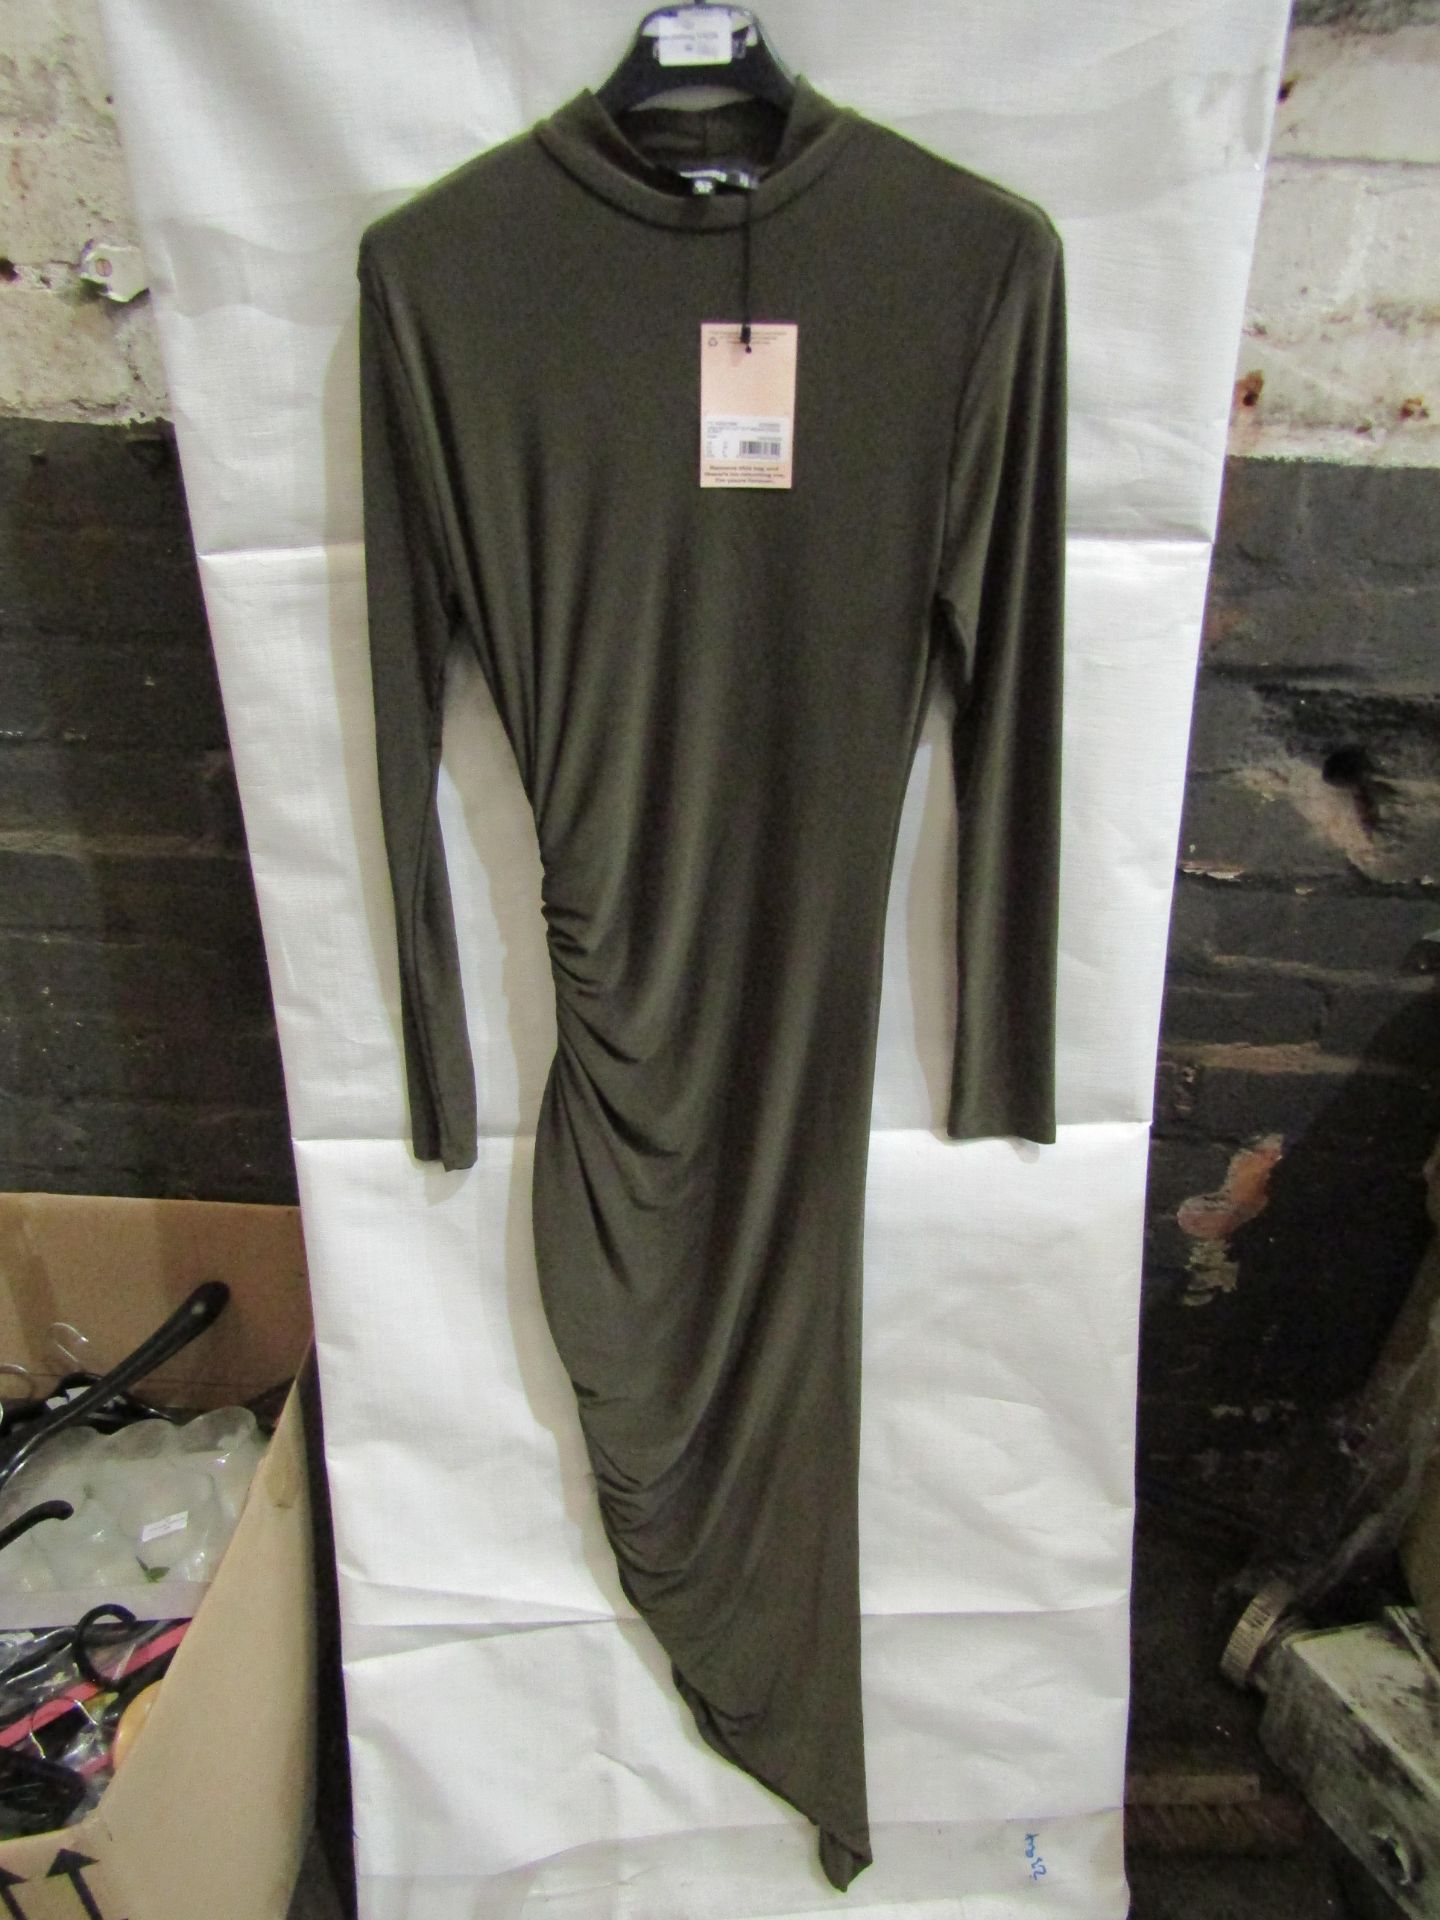 2x Missguided High Neck Cut Out Midaxi Dress Slinky Khaki, Size: 8 - New & Packaged.